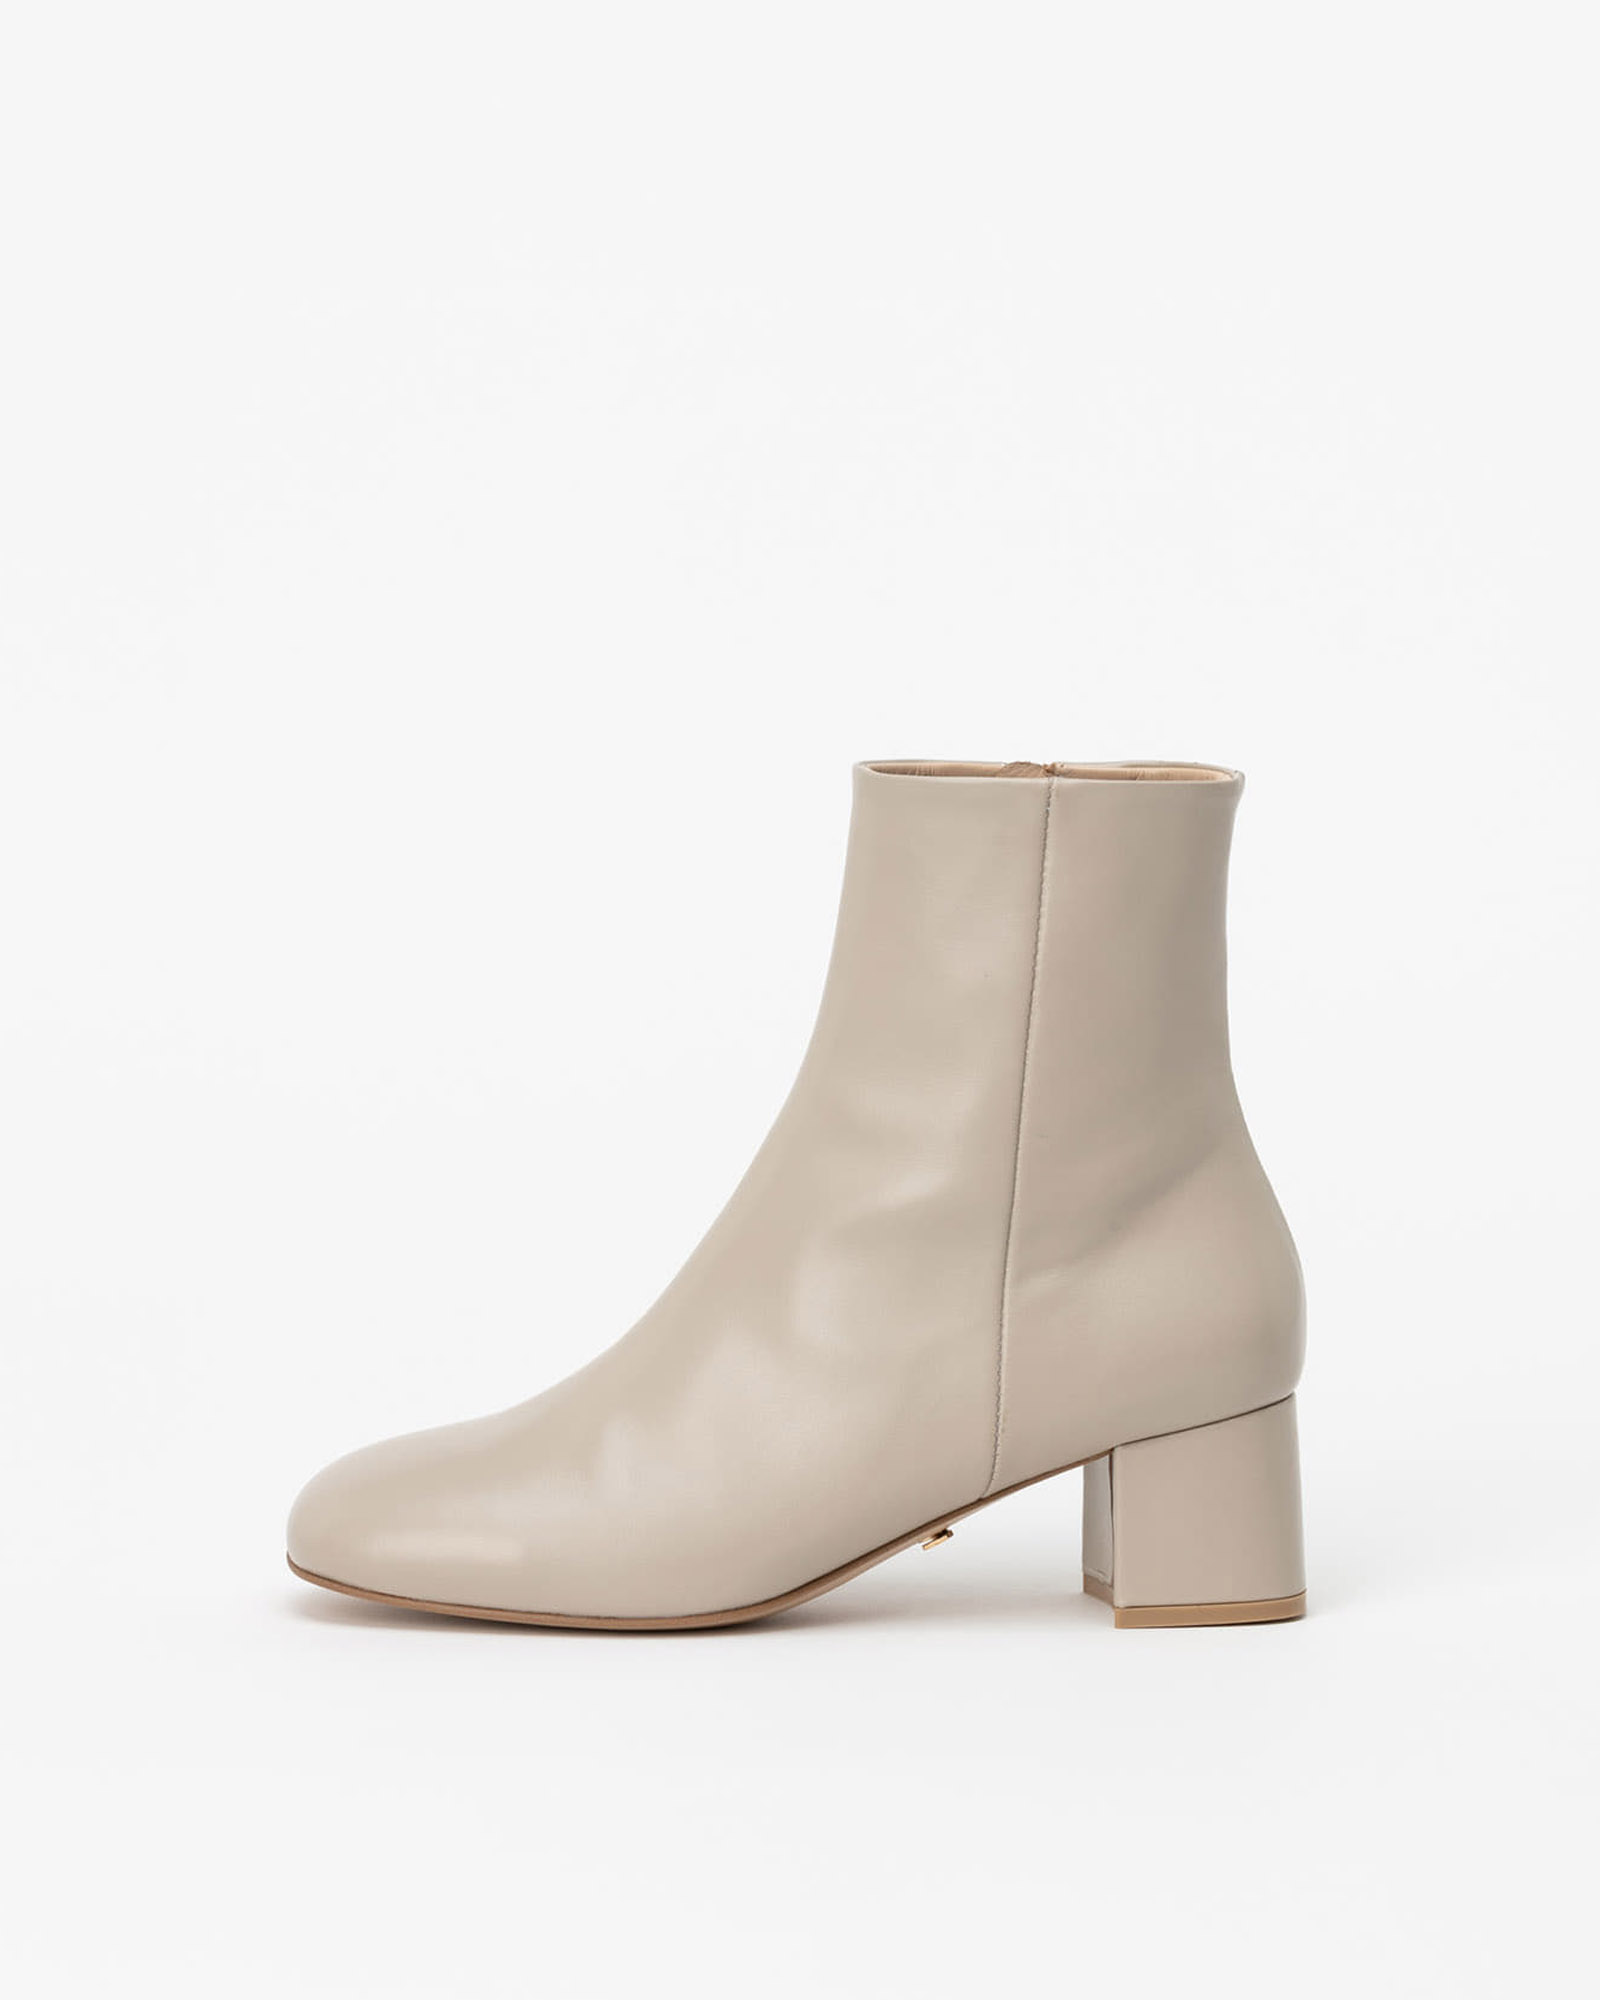 Metronome Boots in Taupe Ivory